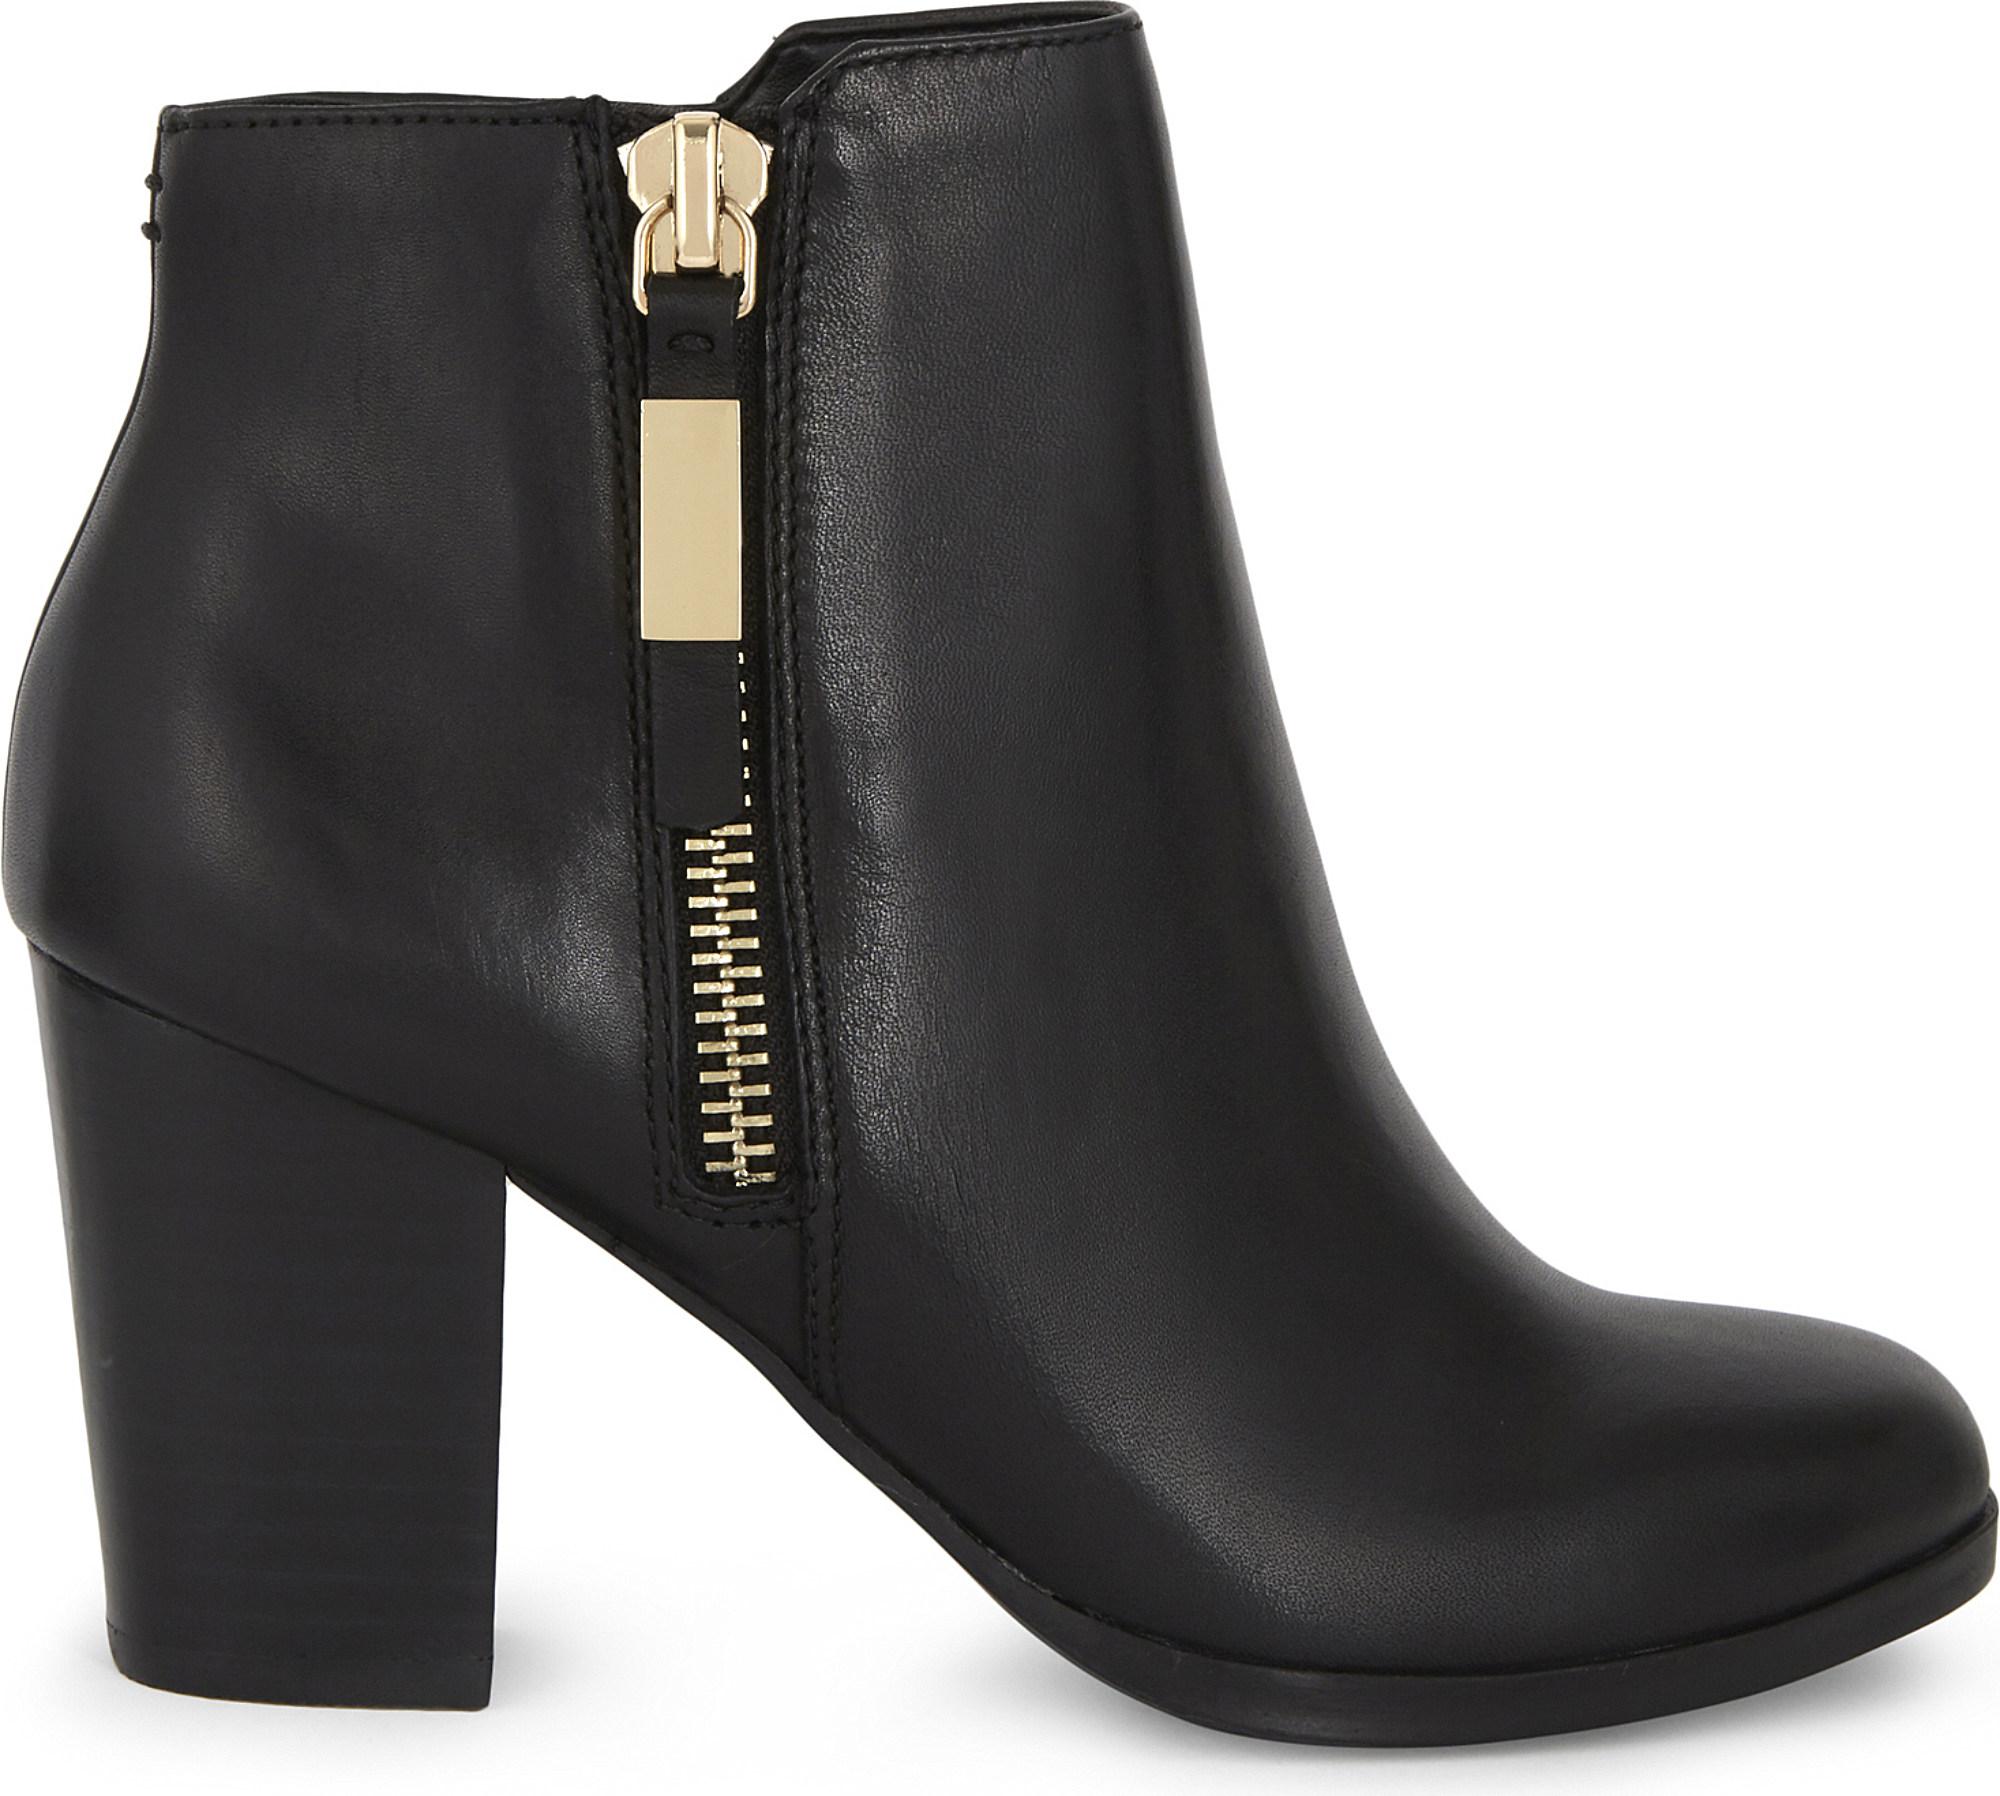 ALDO Mathia Leather Ankle Boots in Black Leather (Black) - Lyst